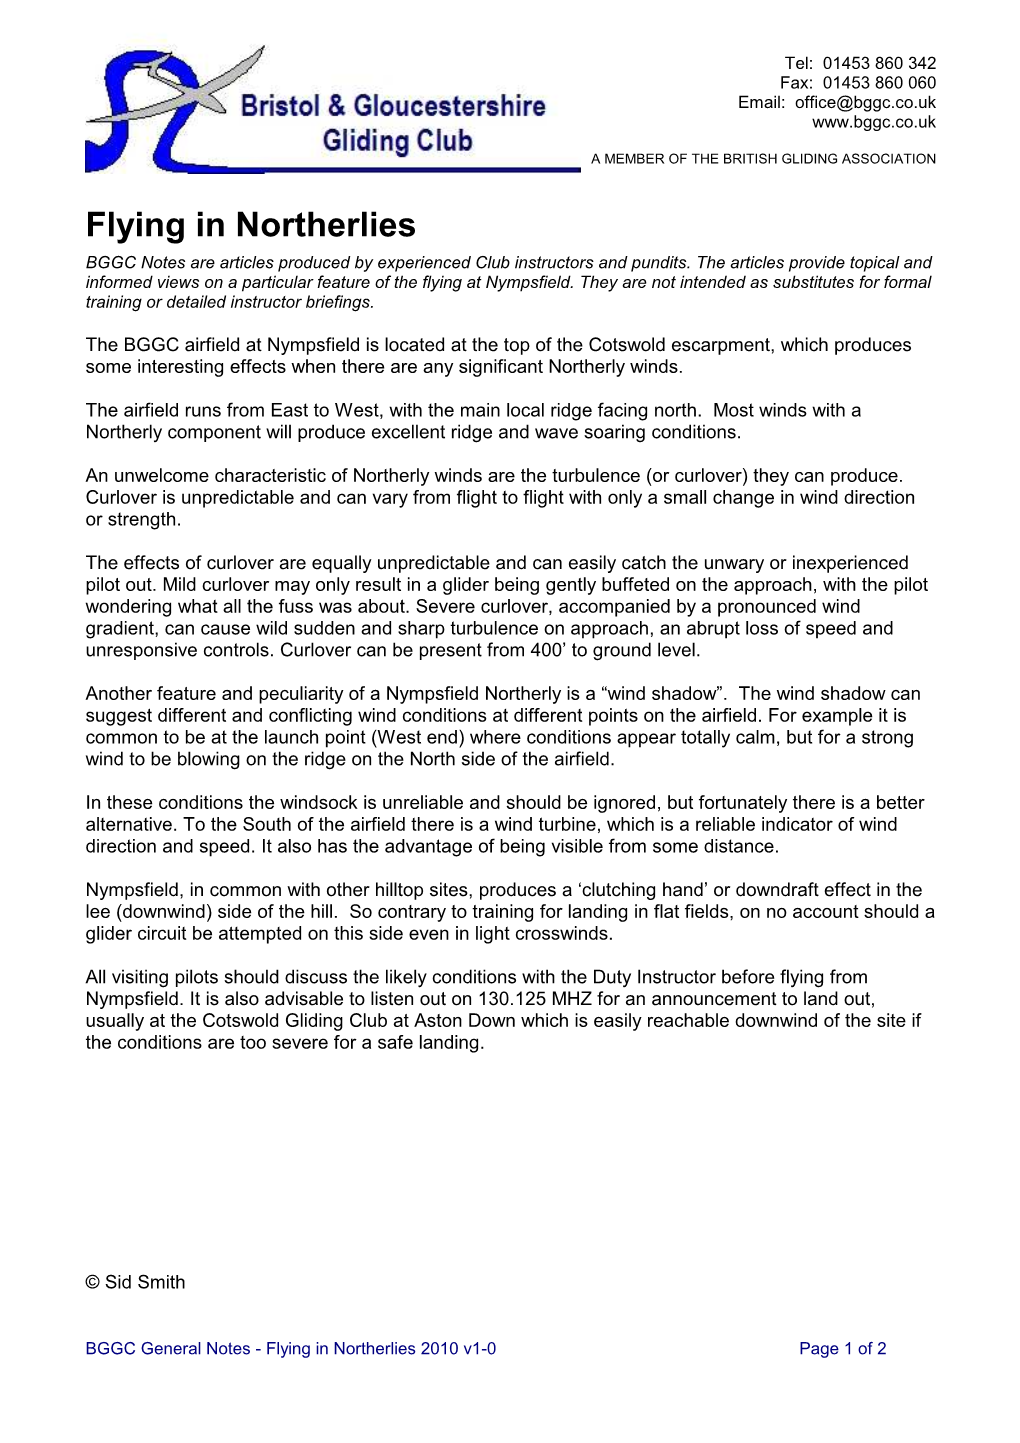 BGGC General Notes - Flying in Northerlies 2010 V1-0 Page 1 of 2